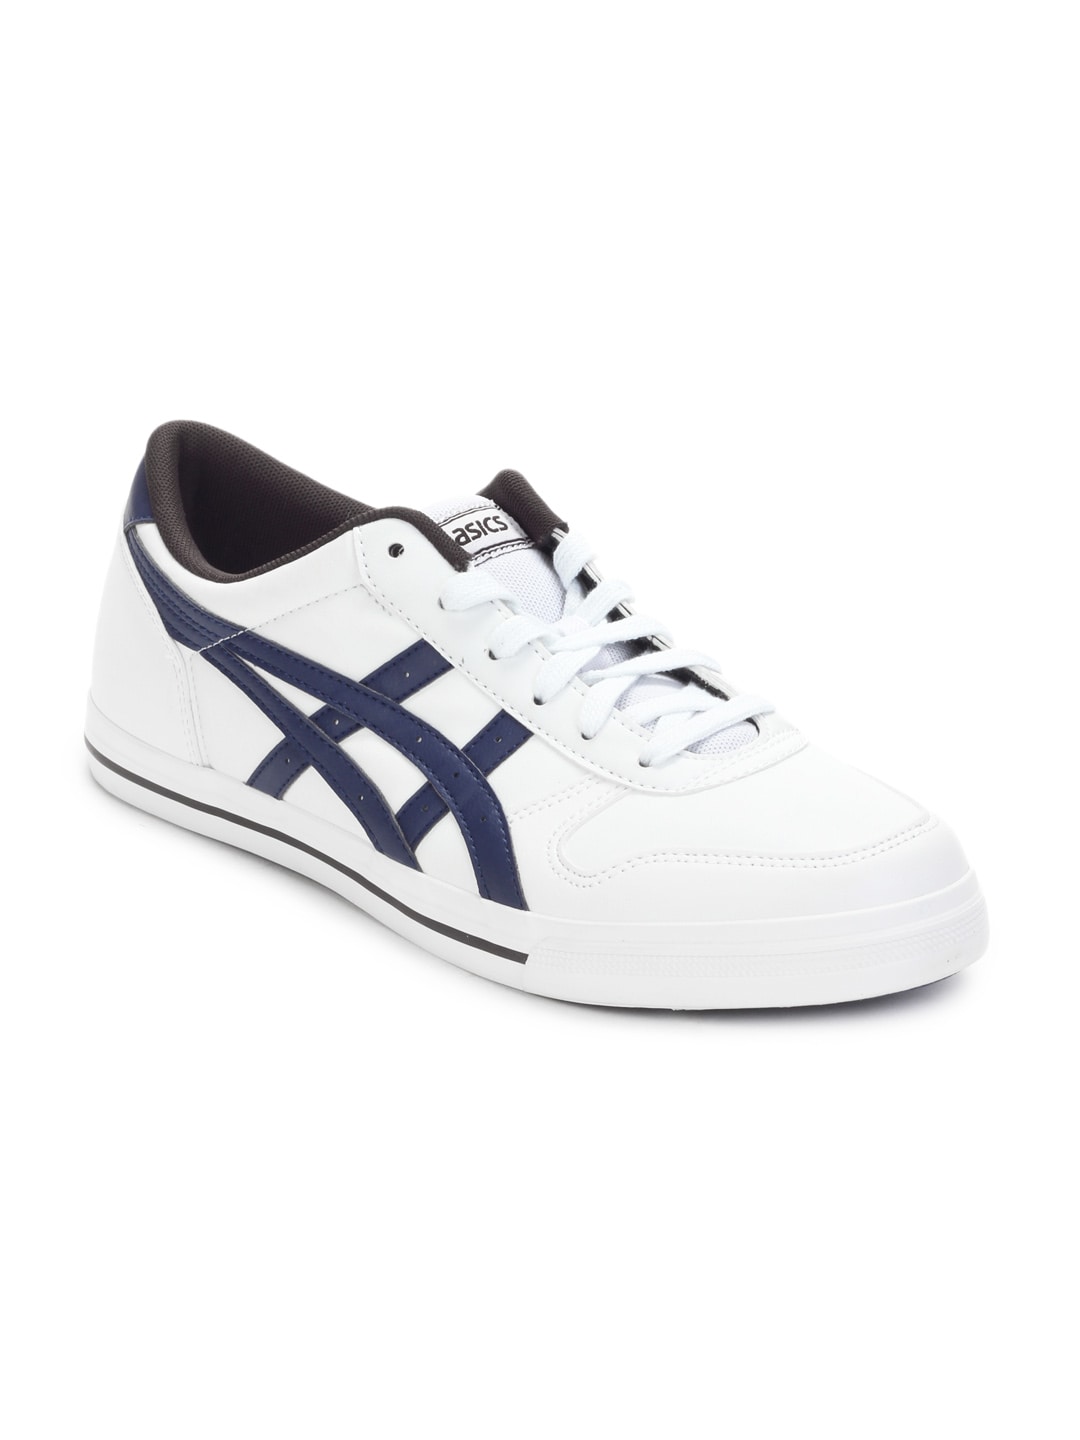 Asics Casual Shoes Online India Shop, SAVE 55% 